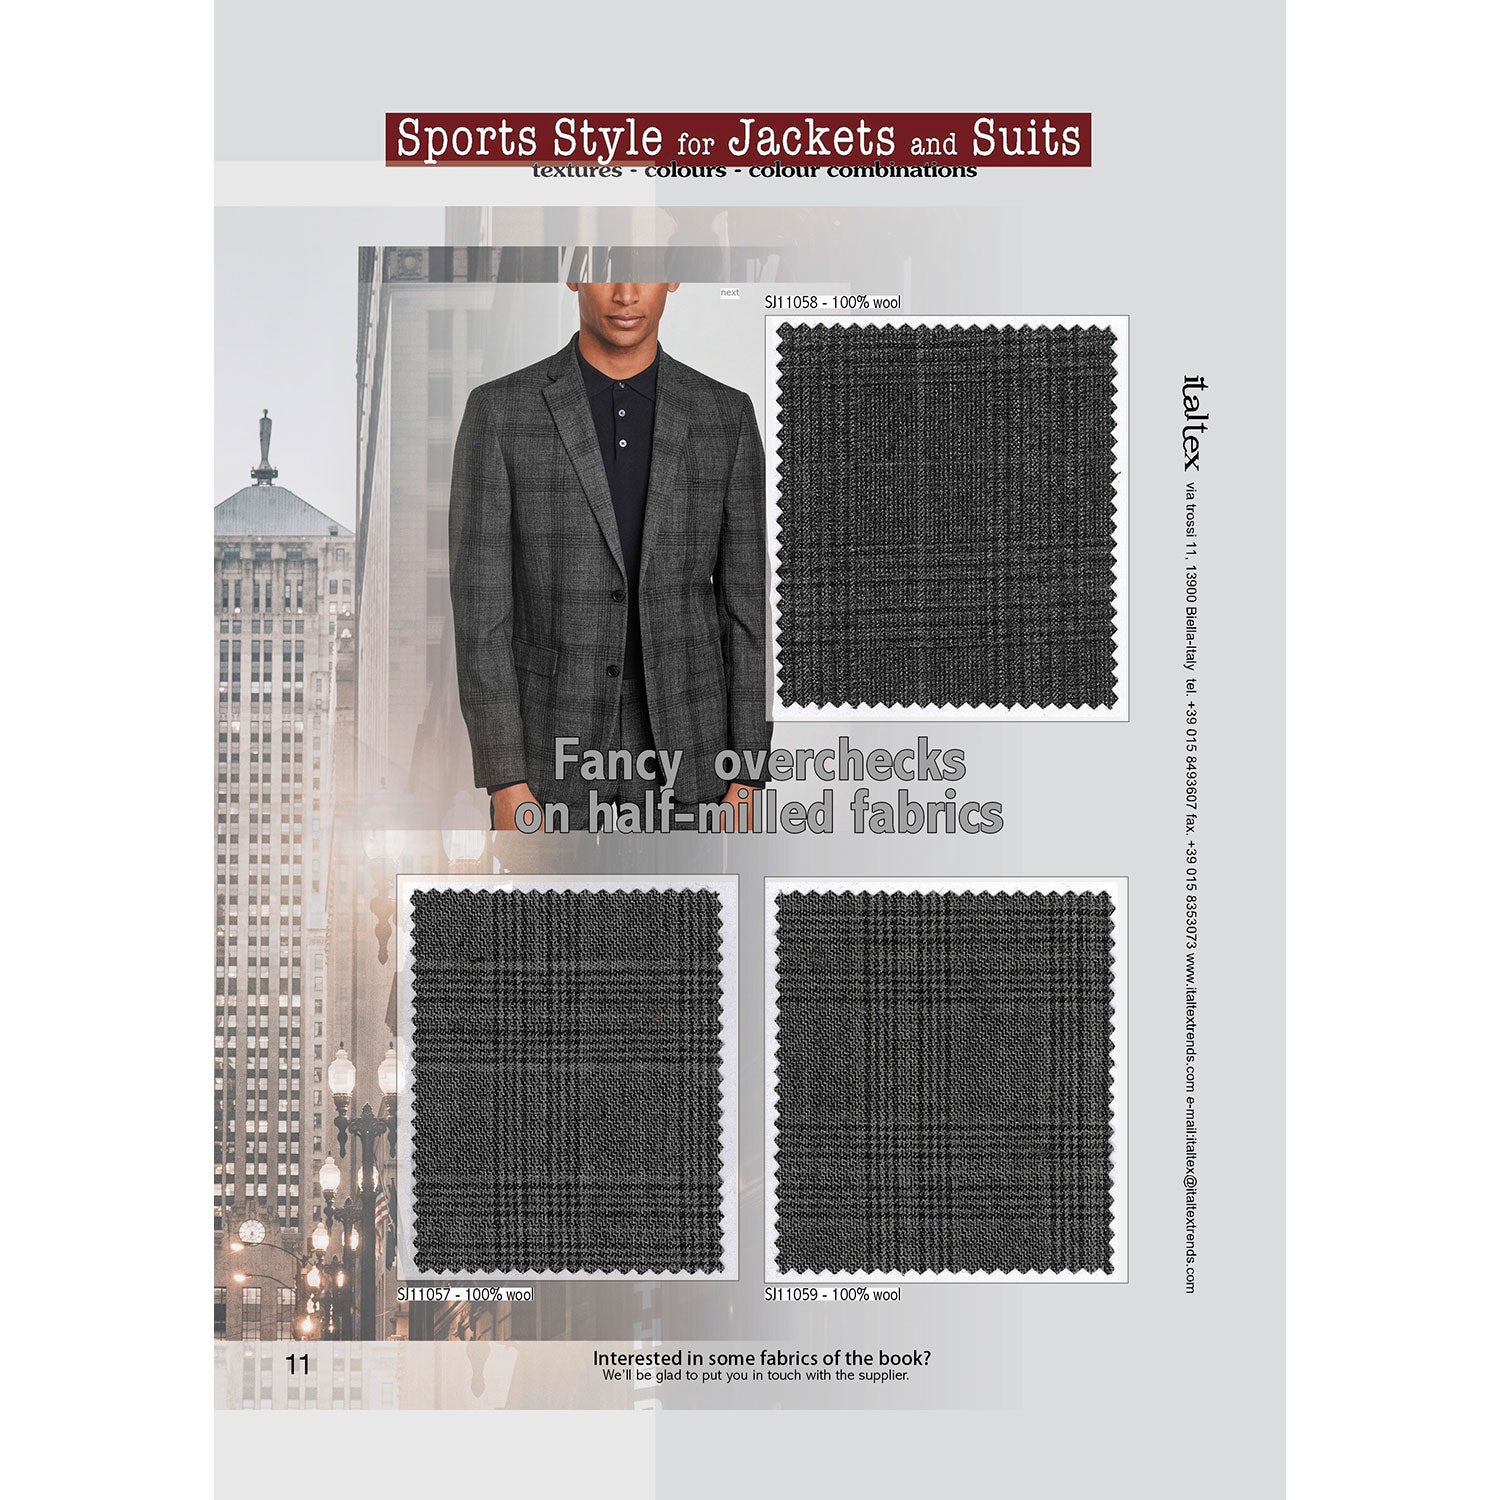 Five swatches of milled fabrics for men's jackets. Three gingham patterns on grey, greyish blue and green. One medium repeat blue and black check on a beige ground. One blue and black overcheck on a melange cold brown background 